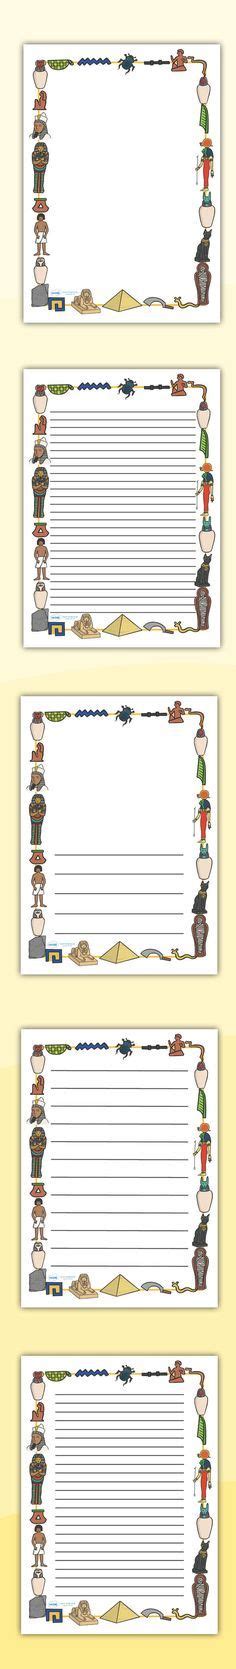 Ancient Egyptian Diary Entry Template